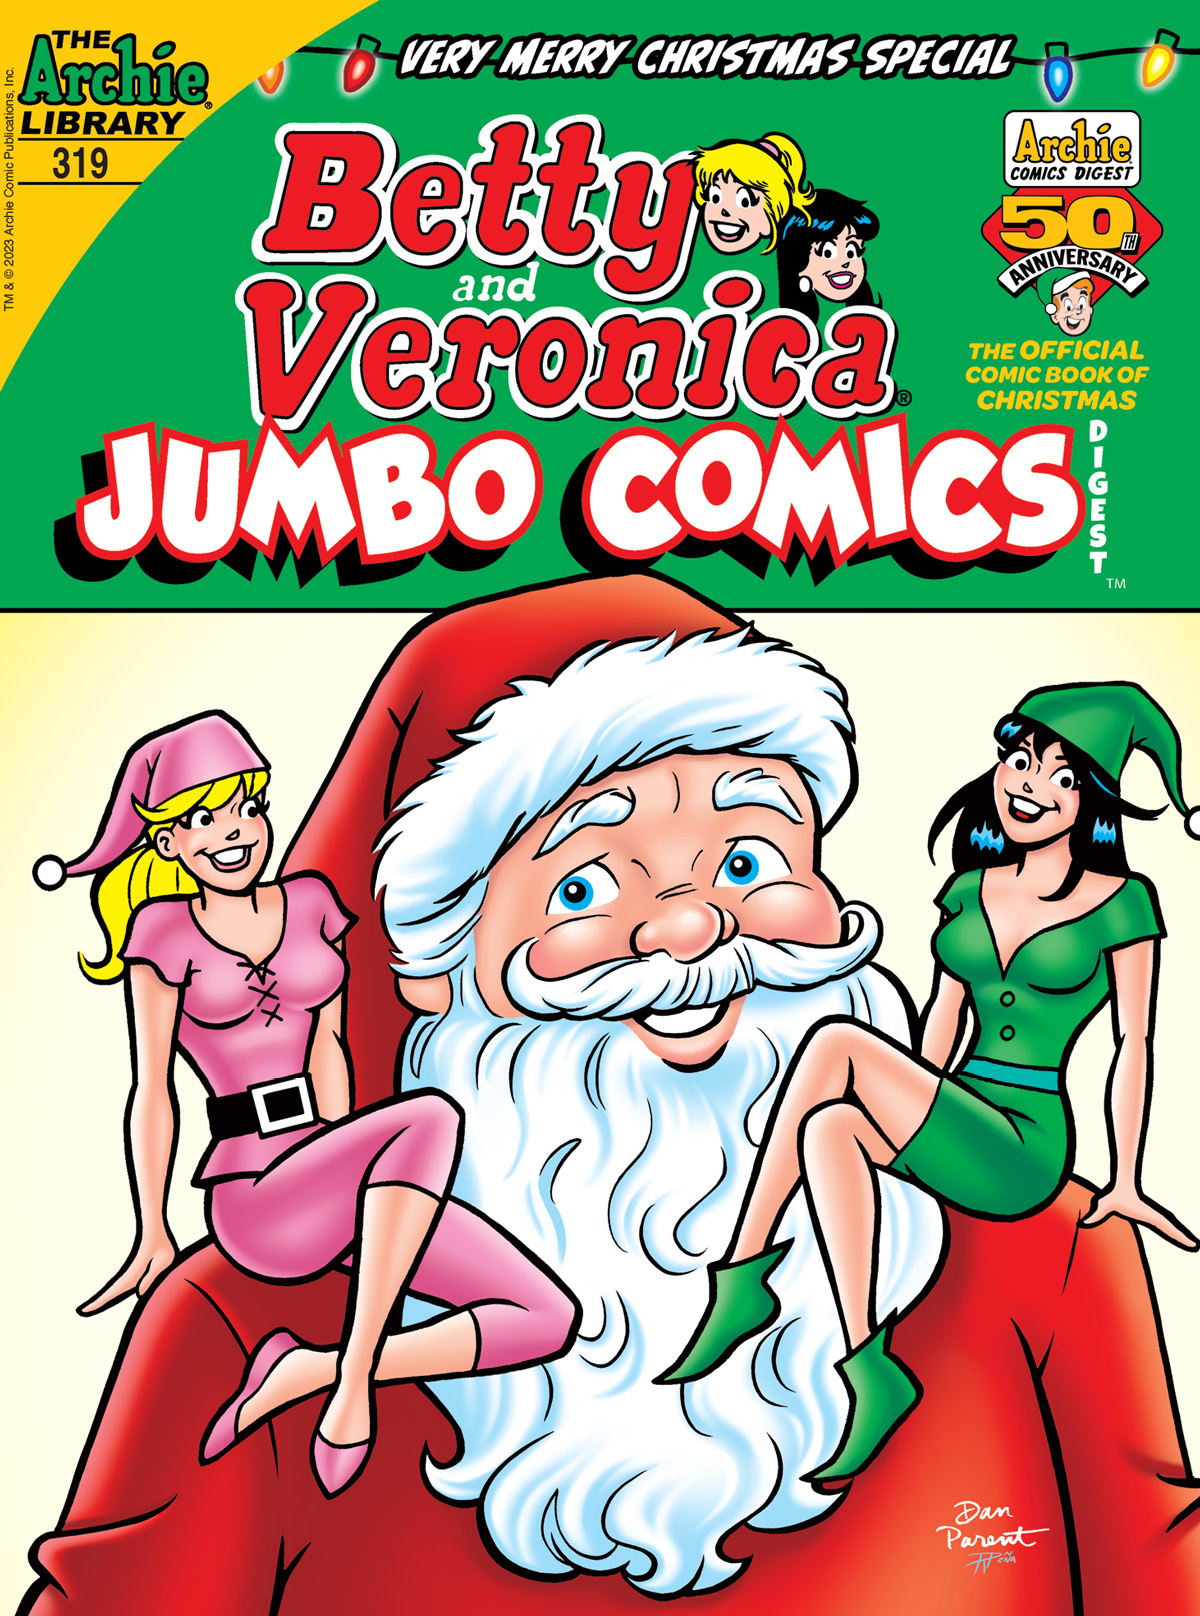 The cover of BETTY & VERONICA DIGEST #319. Betty and Veronica are dressed as Santa's elves, sitting on his shoulders.